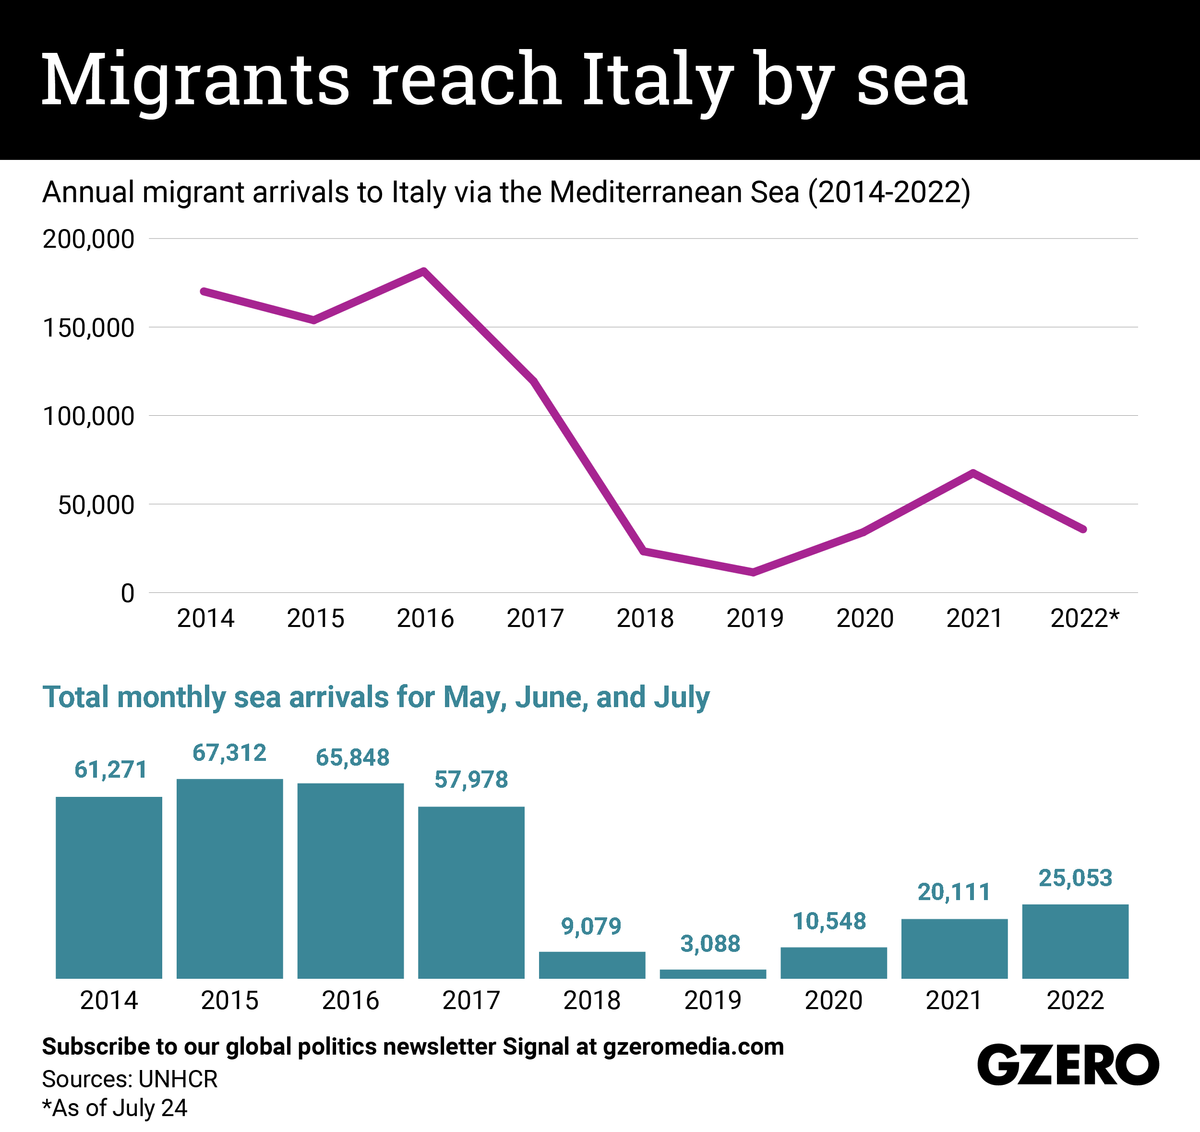 The Graphic Truth: Migrants reach Italy by sea